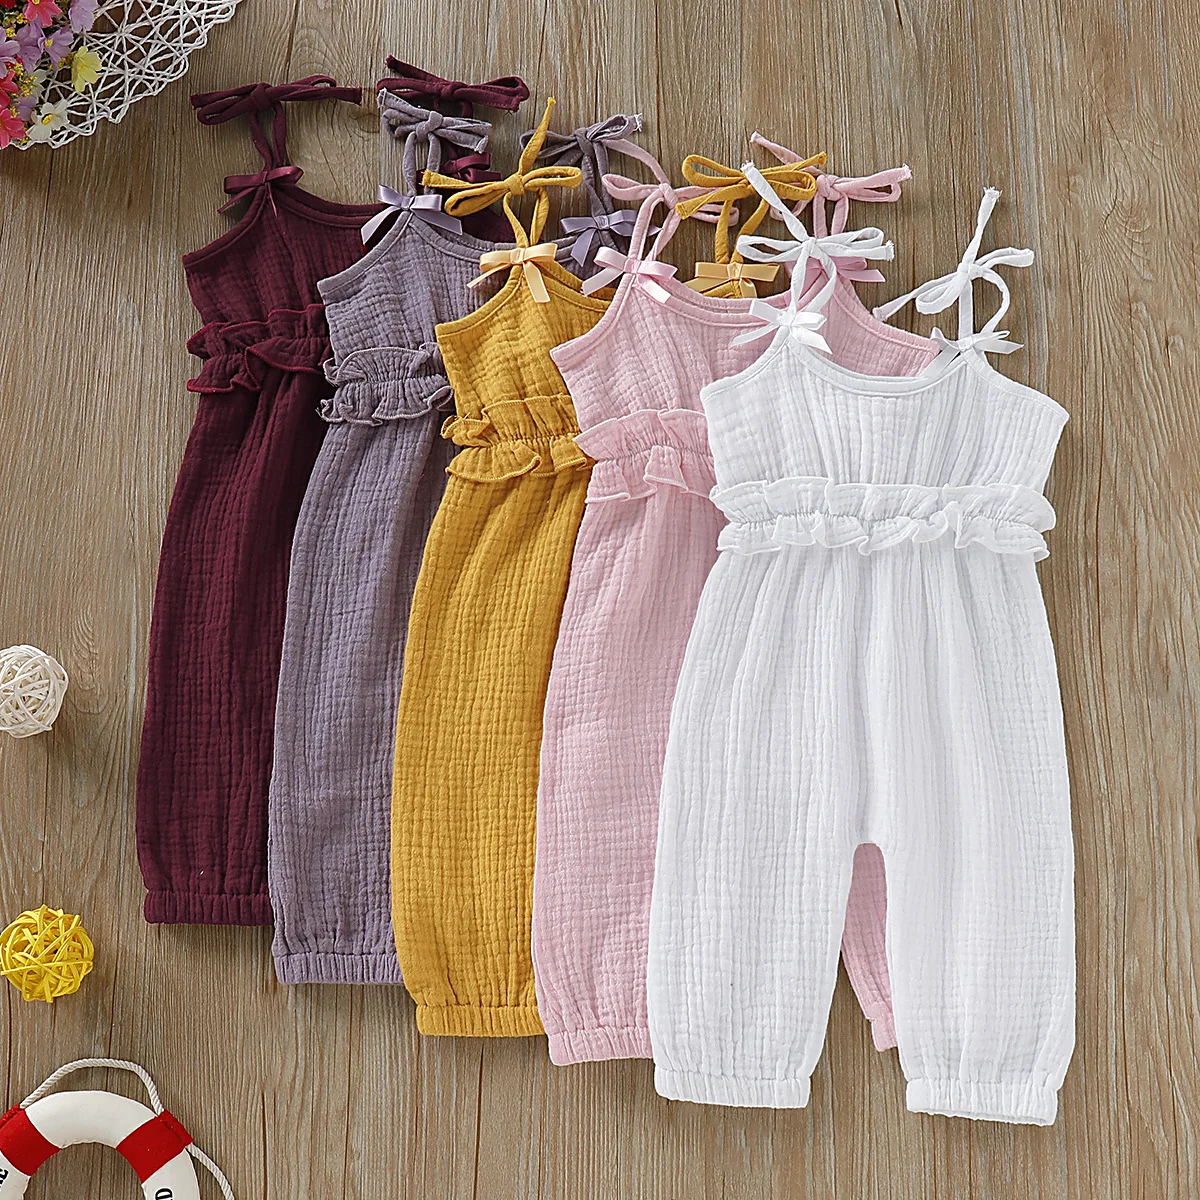 RAINED-Infant Baby Girl Basic Romper Ruffle Short Sleeve Cotton Jumpsuit Bodysuit Outfits Clothes